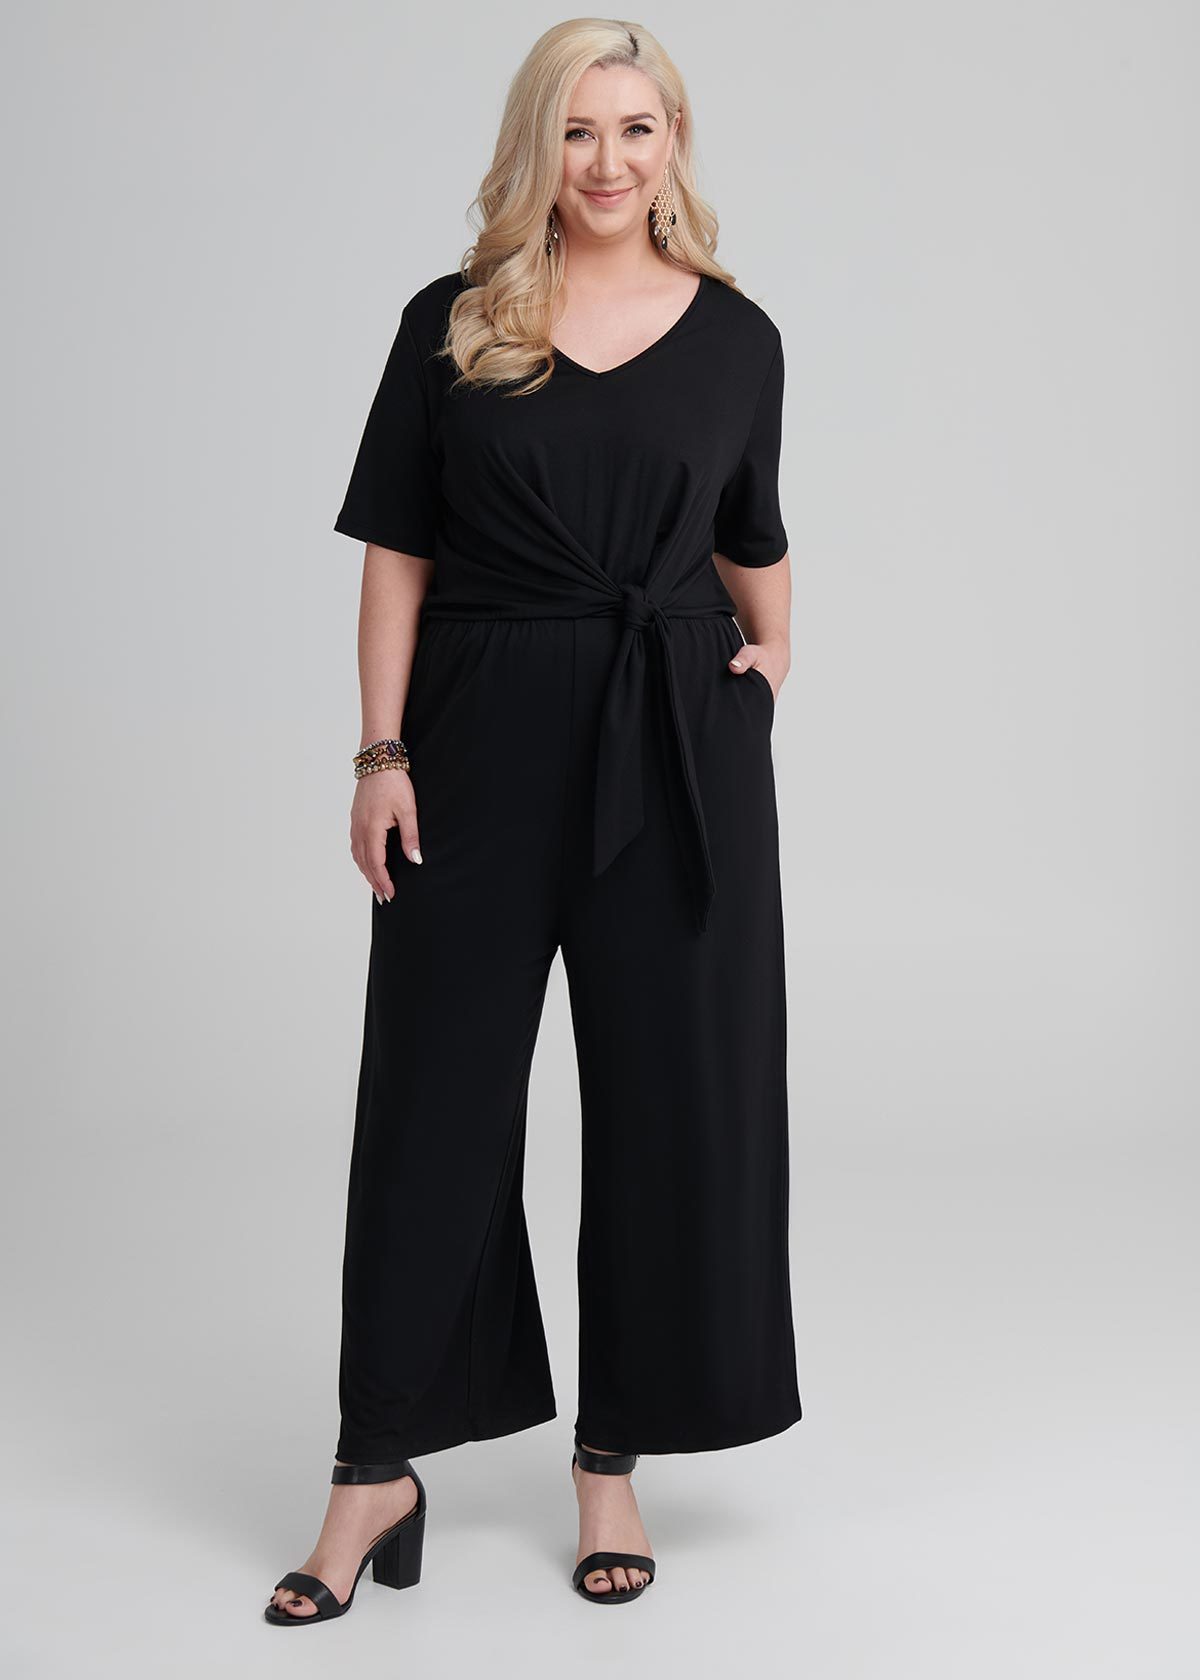 Shop Plus Size Tall Obsession Jumpsuit in Black | Sizes 12-30 | Taking ...